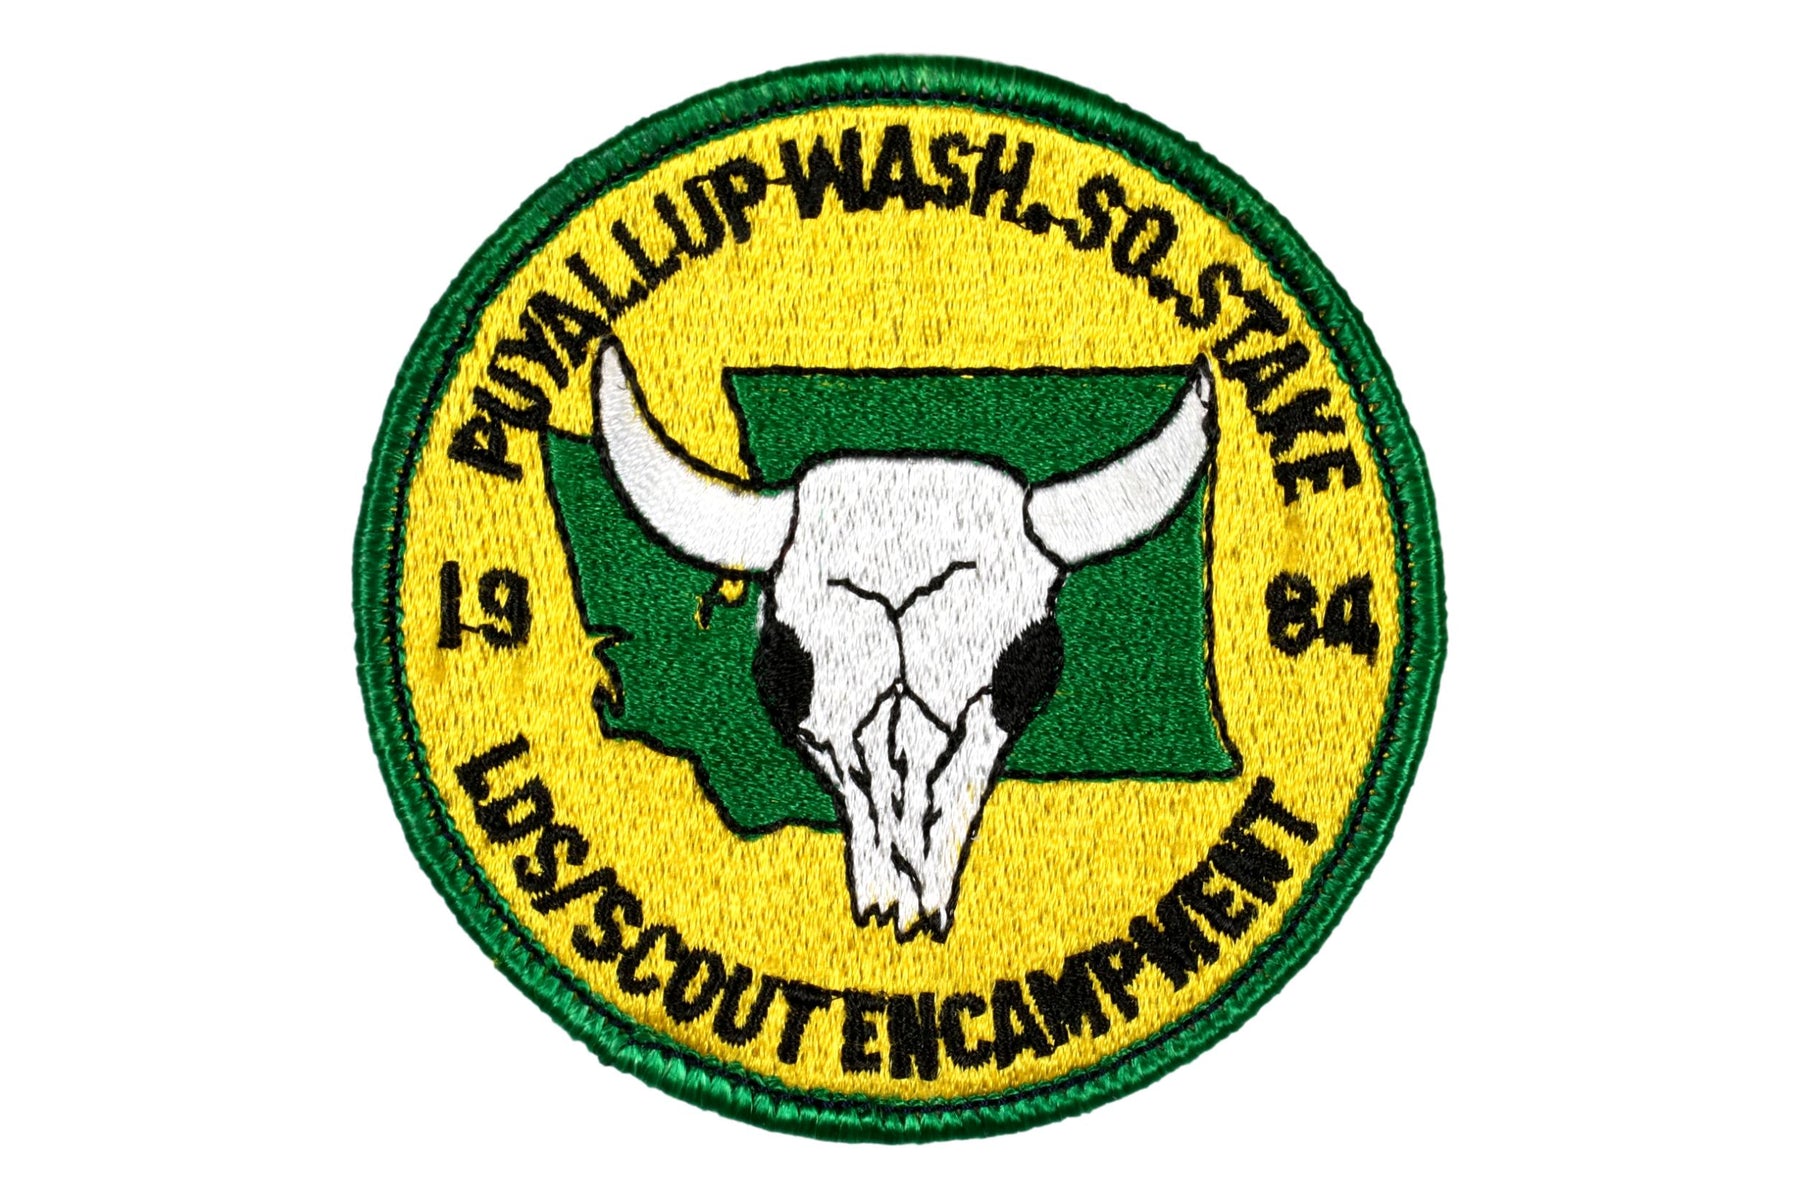 1984 Puyallup South Stake LDS Encampment Patch